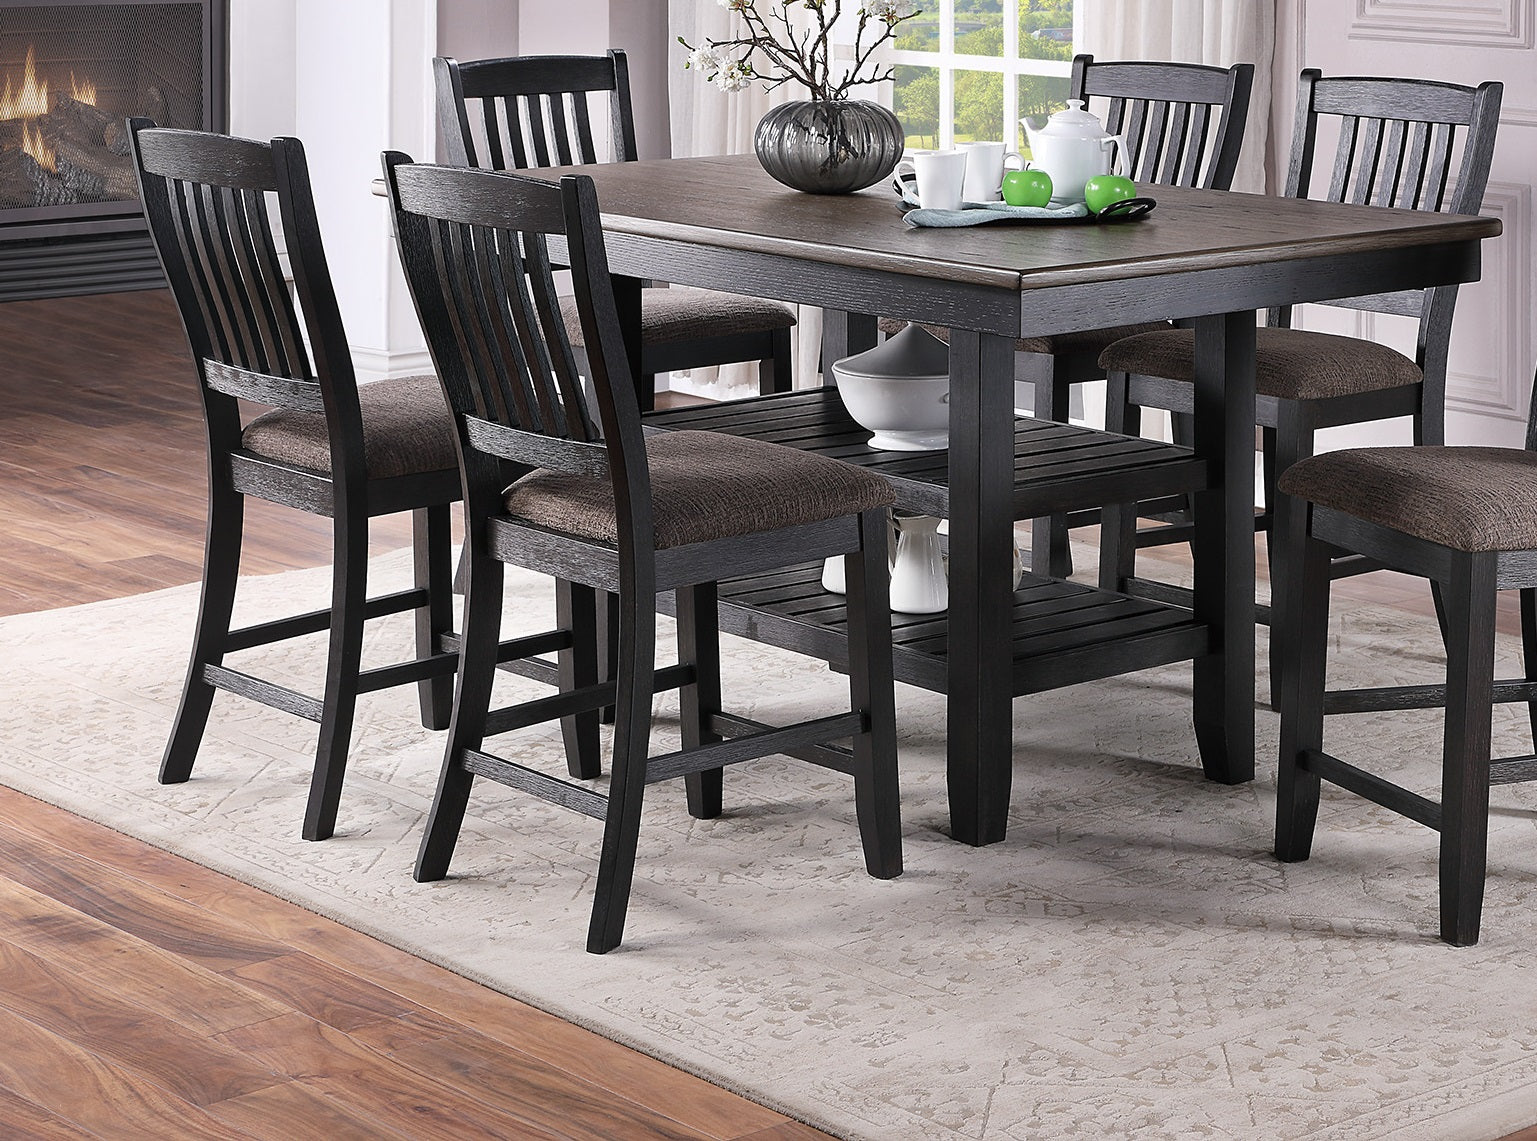 ZNTS 1pc Cunter Height Dining Table Dark Coffee Finish Kitchen Breakfast Dining Room Furniture Table w 2x B01183547